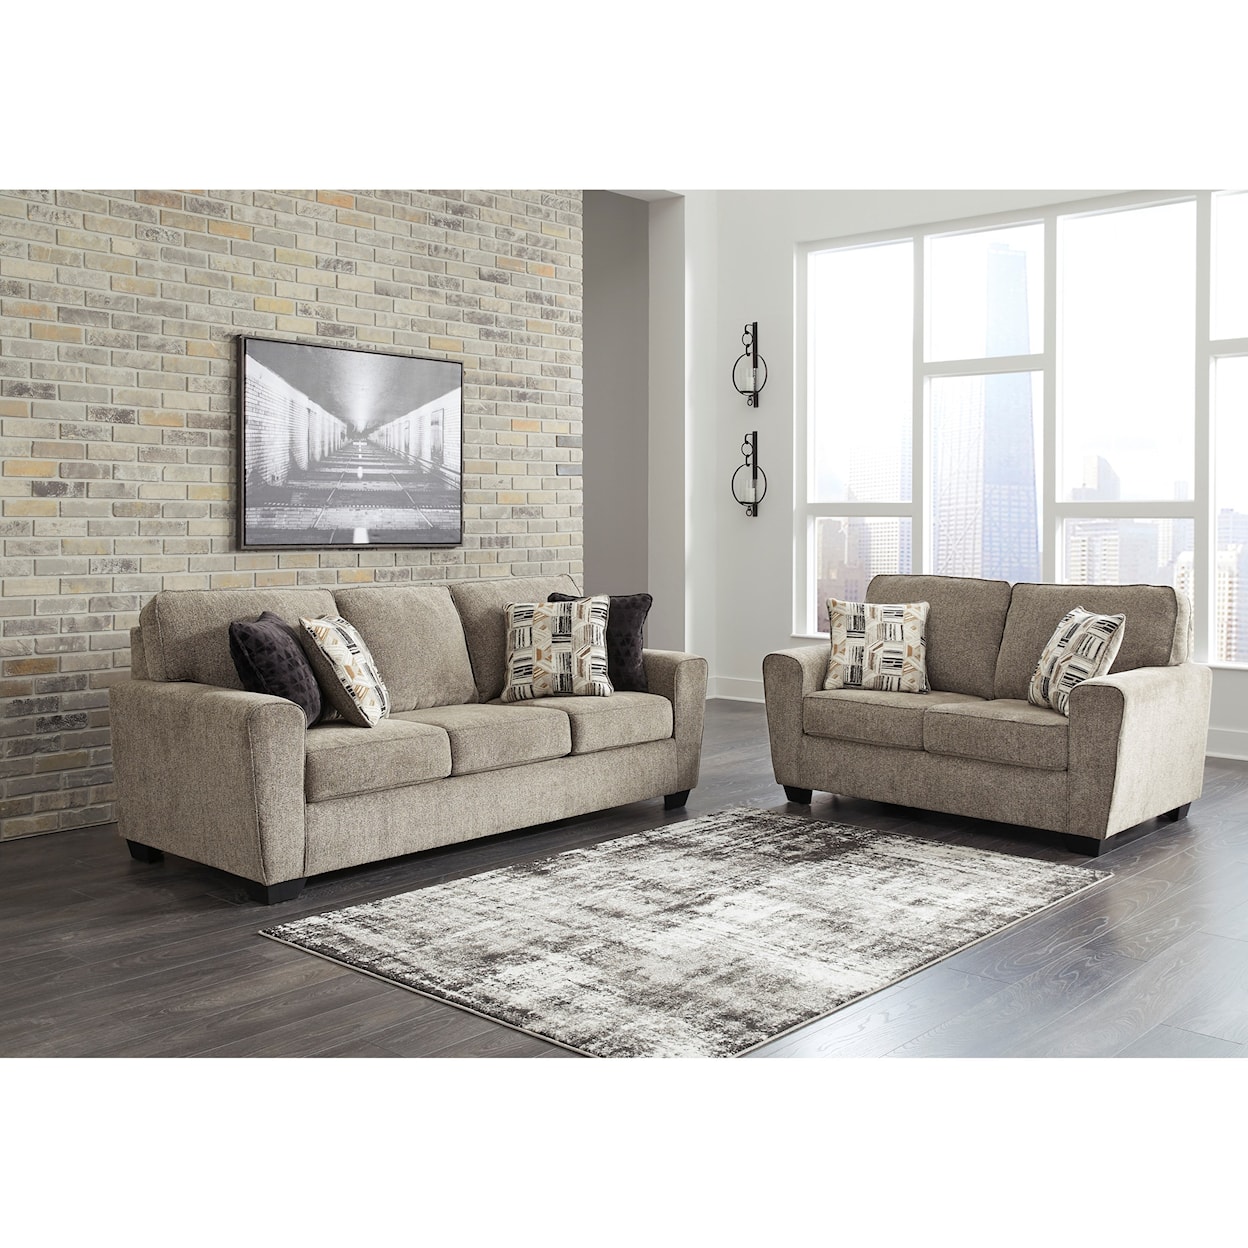 Ashley Furniture Benchcraft McCluer Living Room Group